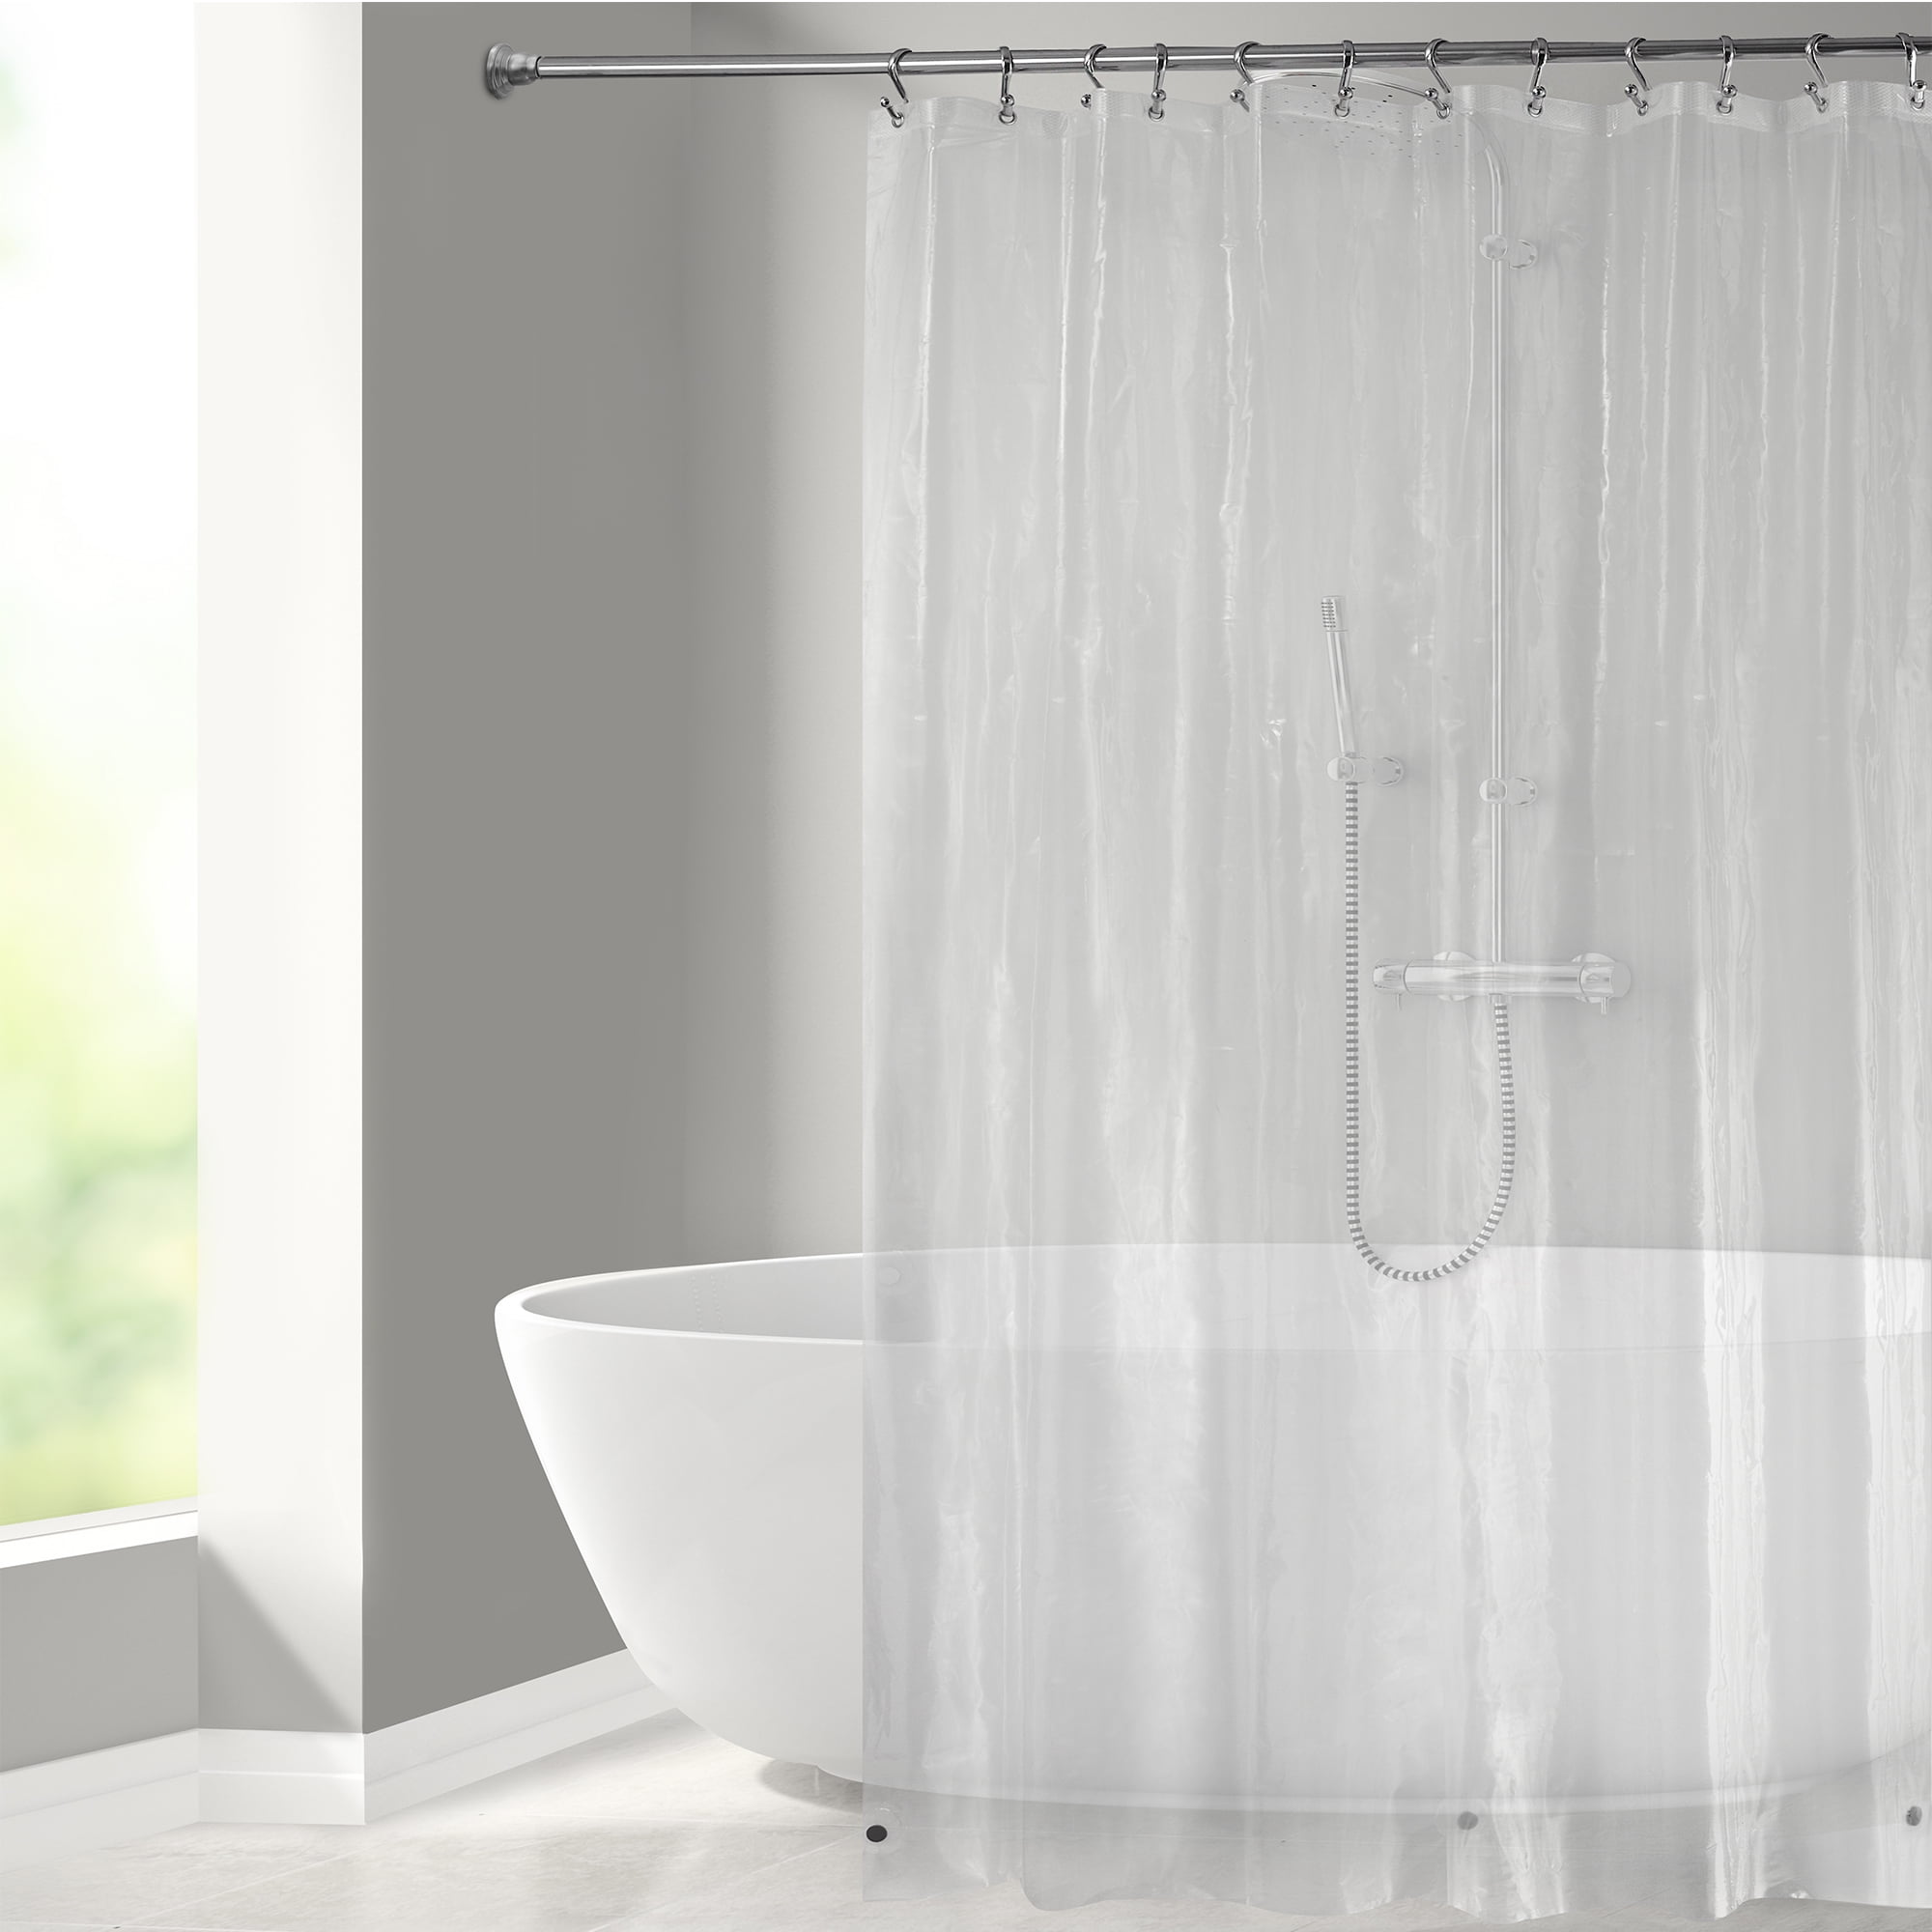 Water-Resistant Bathroom Shower Curtain Sets Thicker-Extra Long with Hooks Ring 